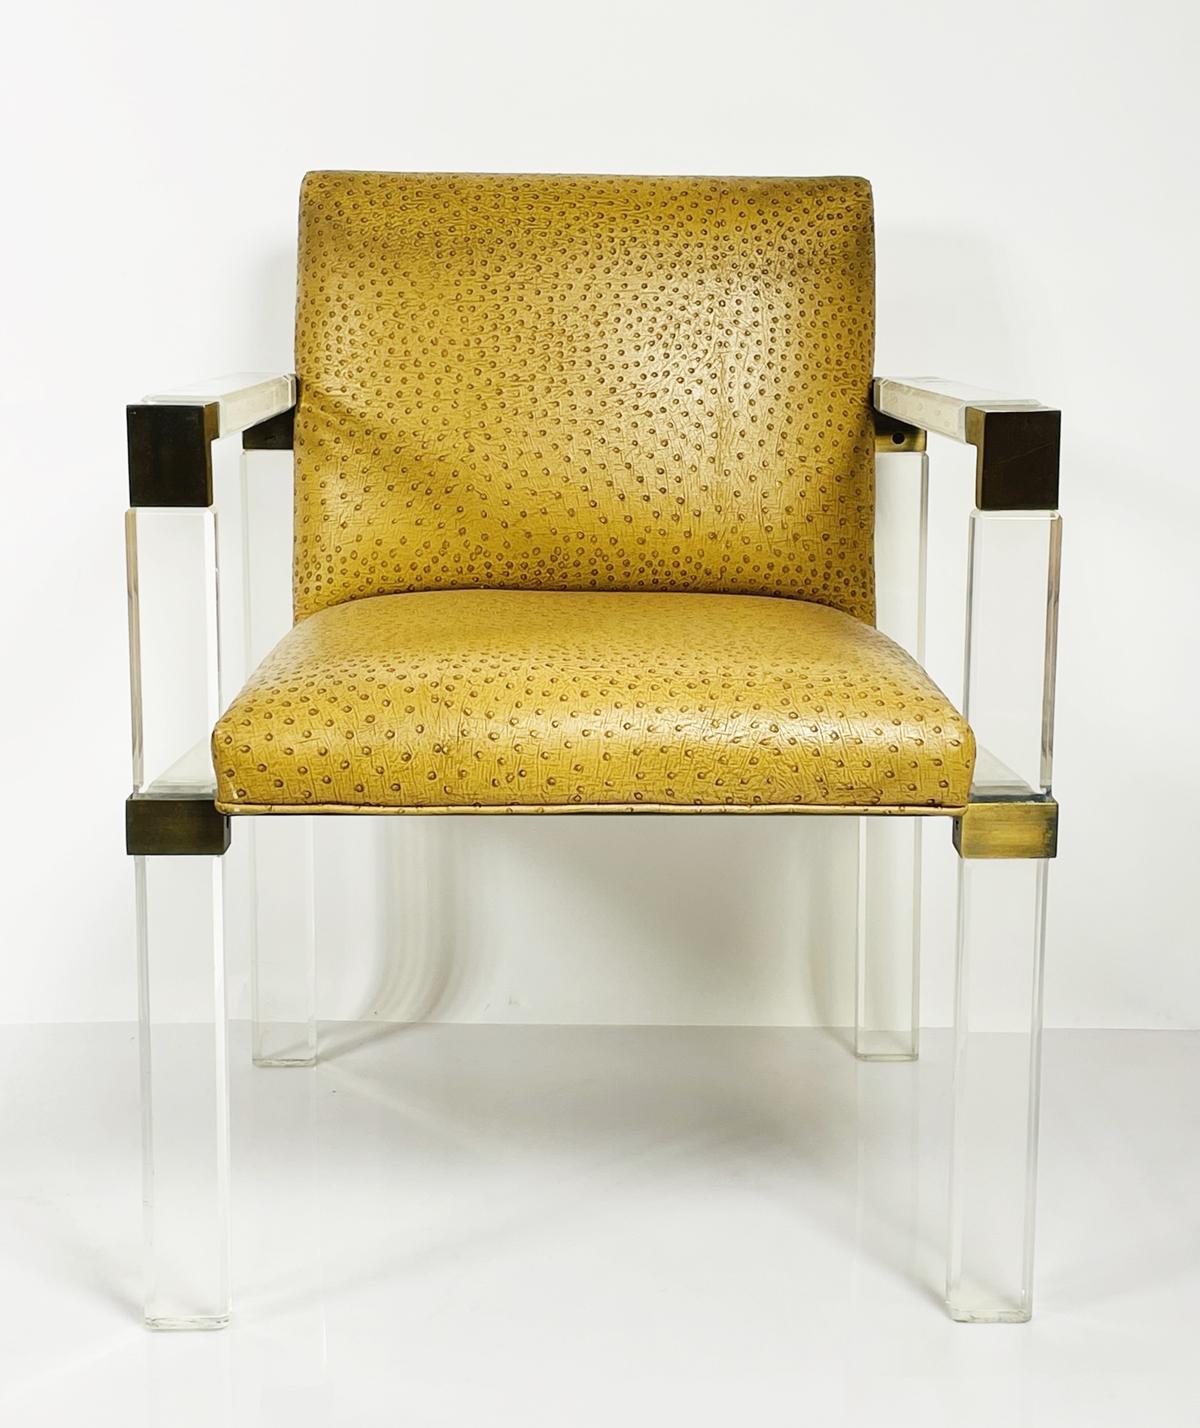 Introducing the Lucite & Brass Lounge Arm Chair by Charles Hollis Jones, a stunning piece of furniture that will elevate any space with its sleek and modern design. The chair features a unique combination of lucite and brass, creating a striking